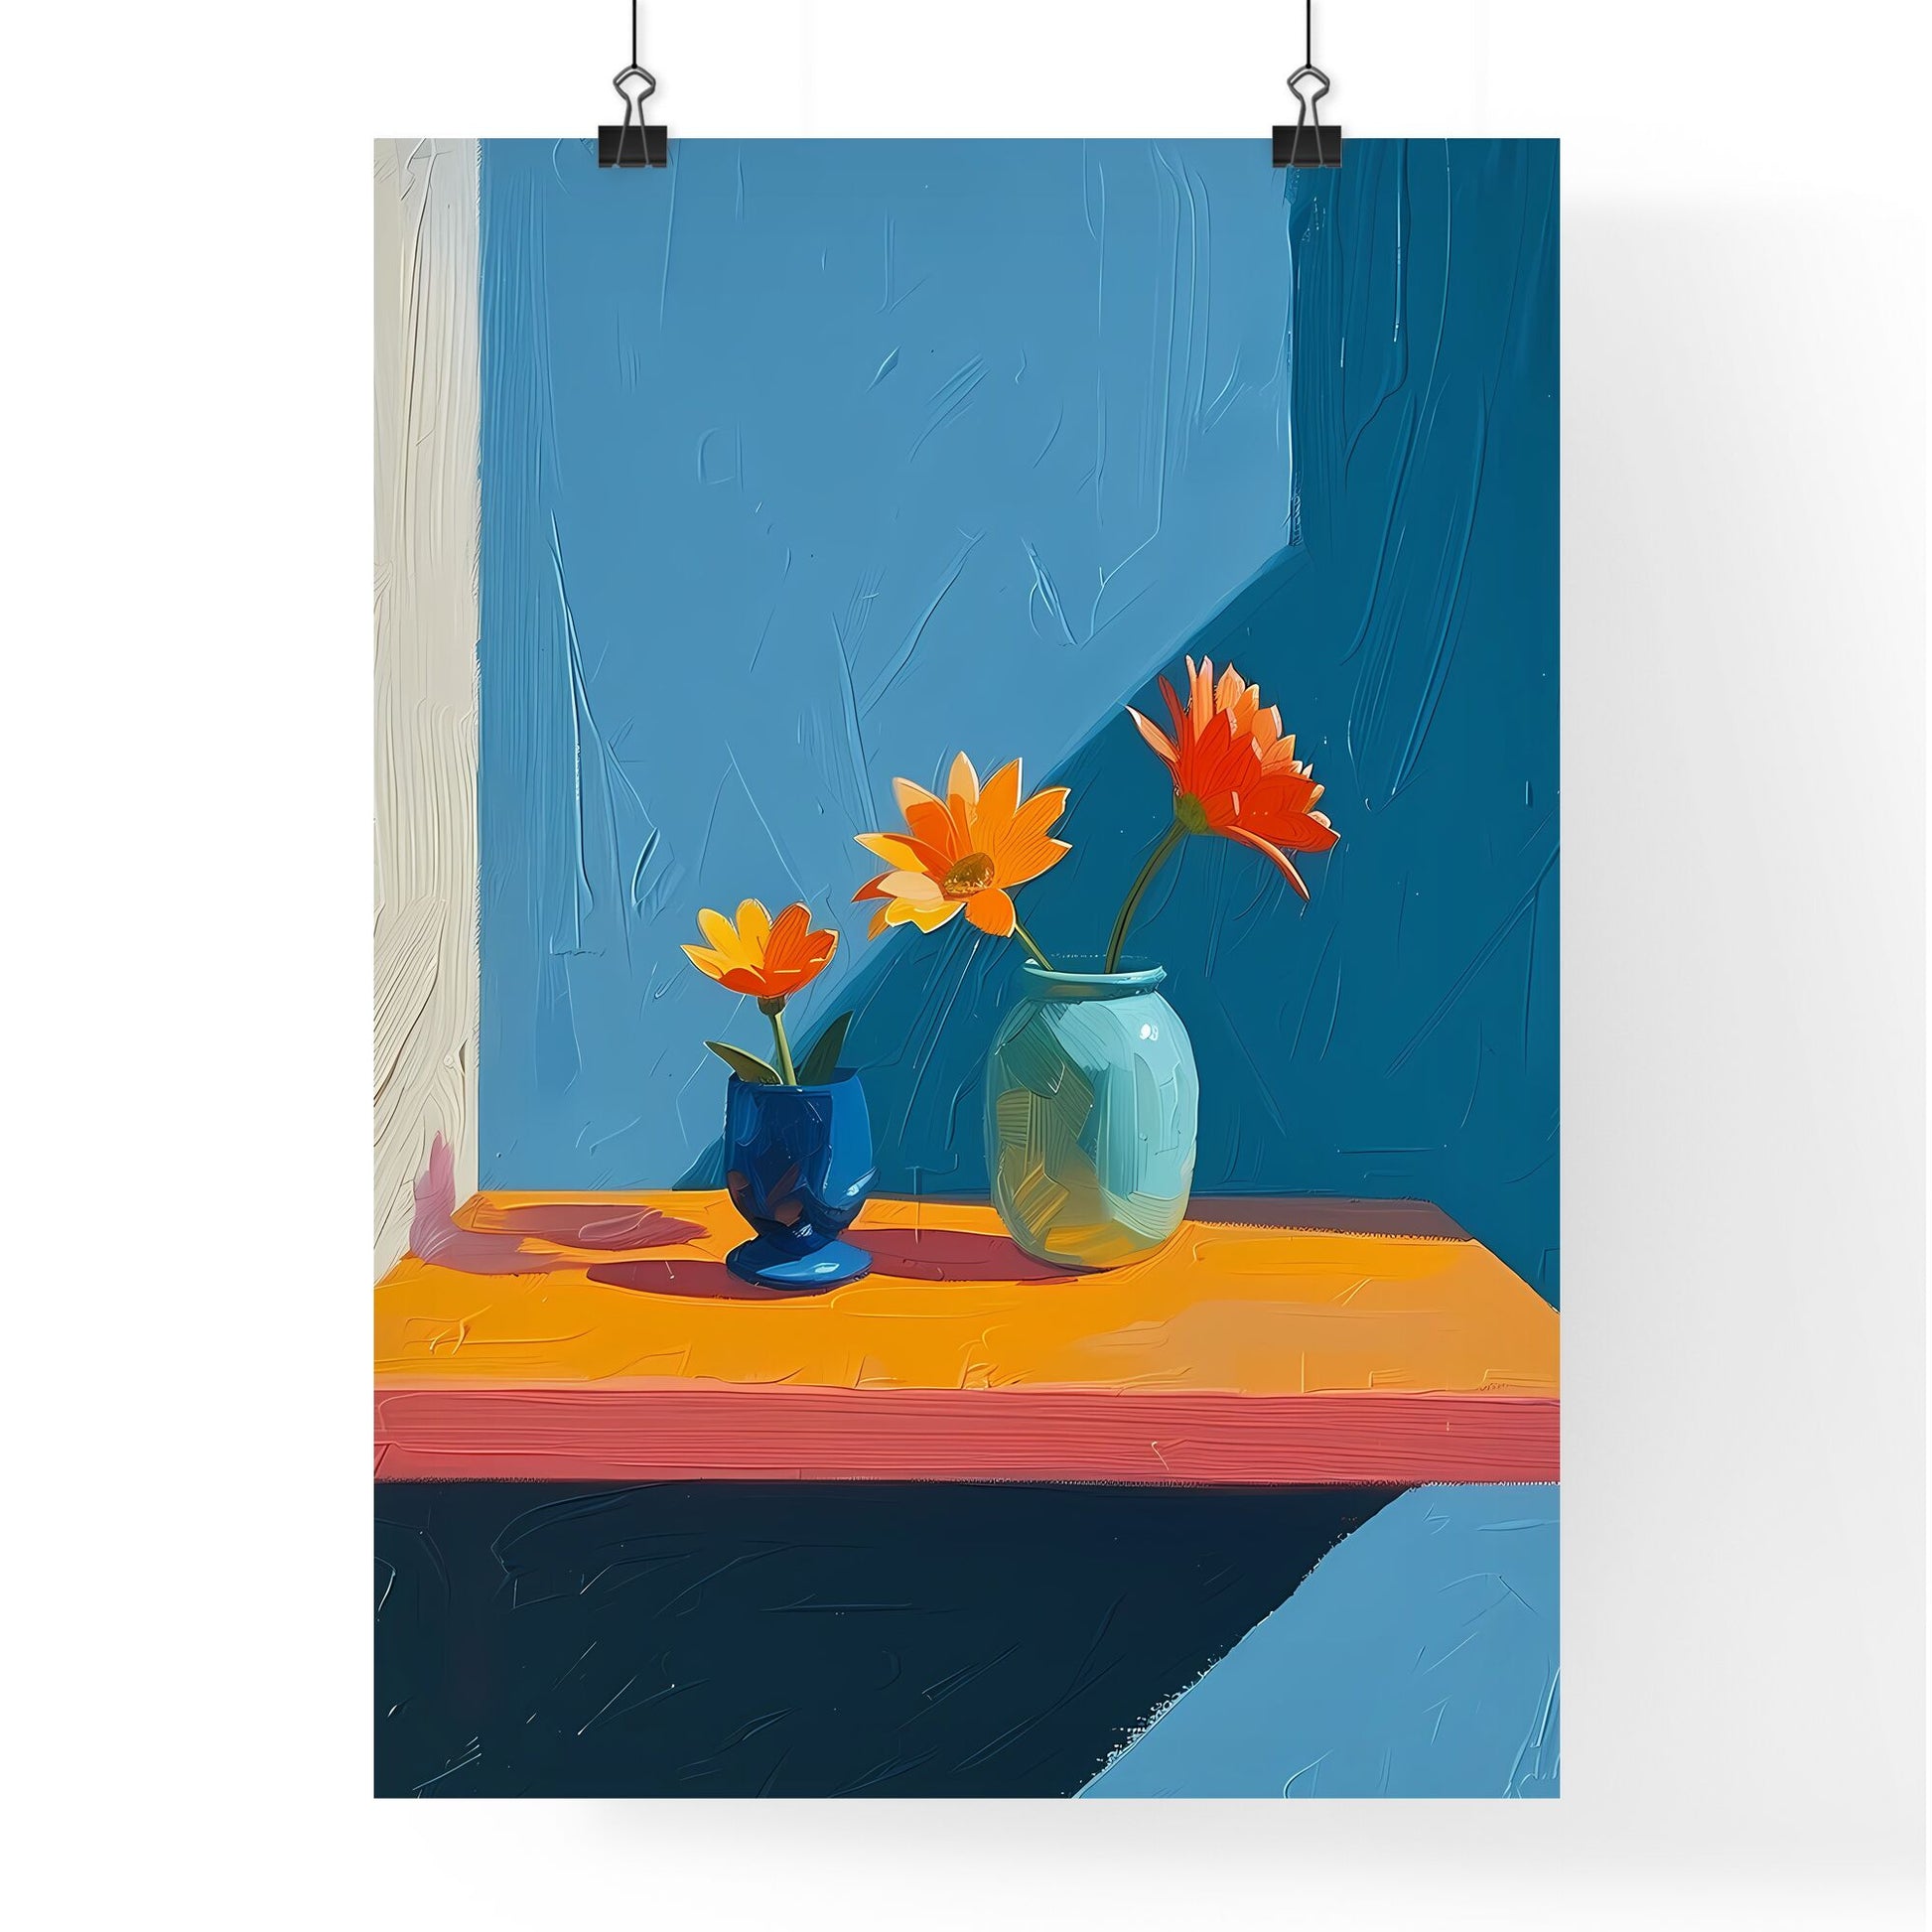 Vibrant Still Life Painting: Complementary Colors, Triadic Composition, Flowers in Blue Vases on Shelf Default Title